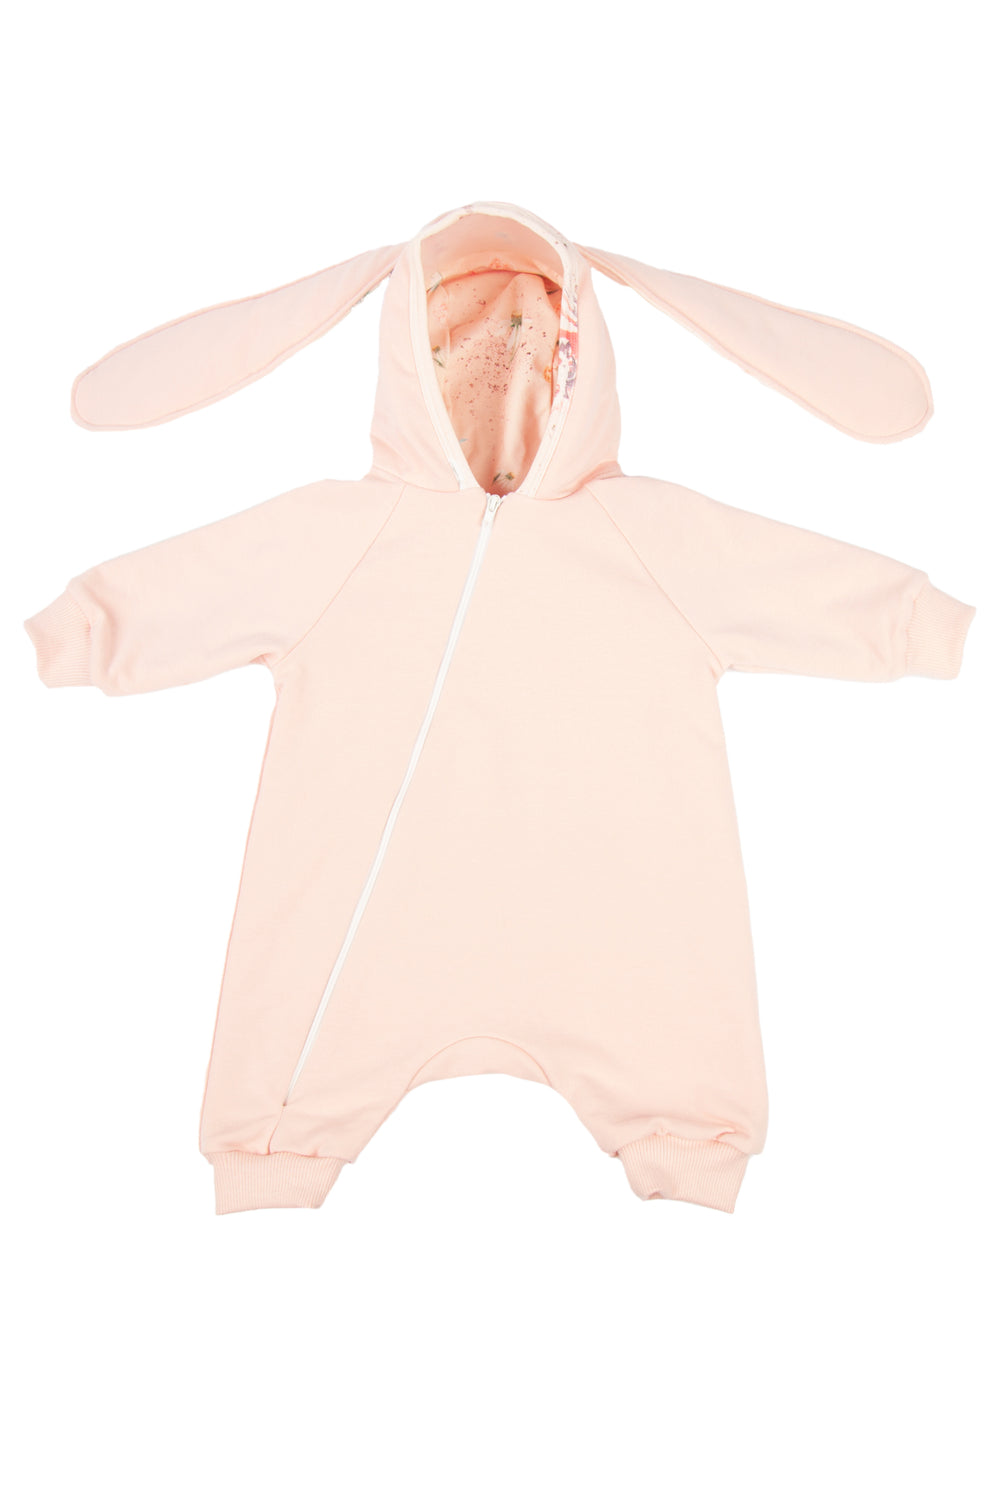 Jamiks "Andrea" Apricot Bunny Ear Romper | iphoneandroidapplications